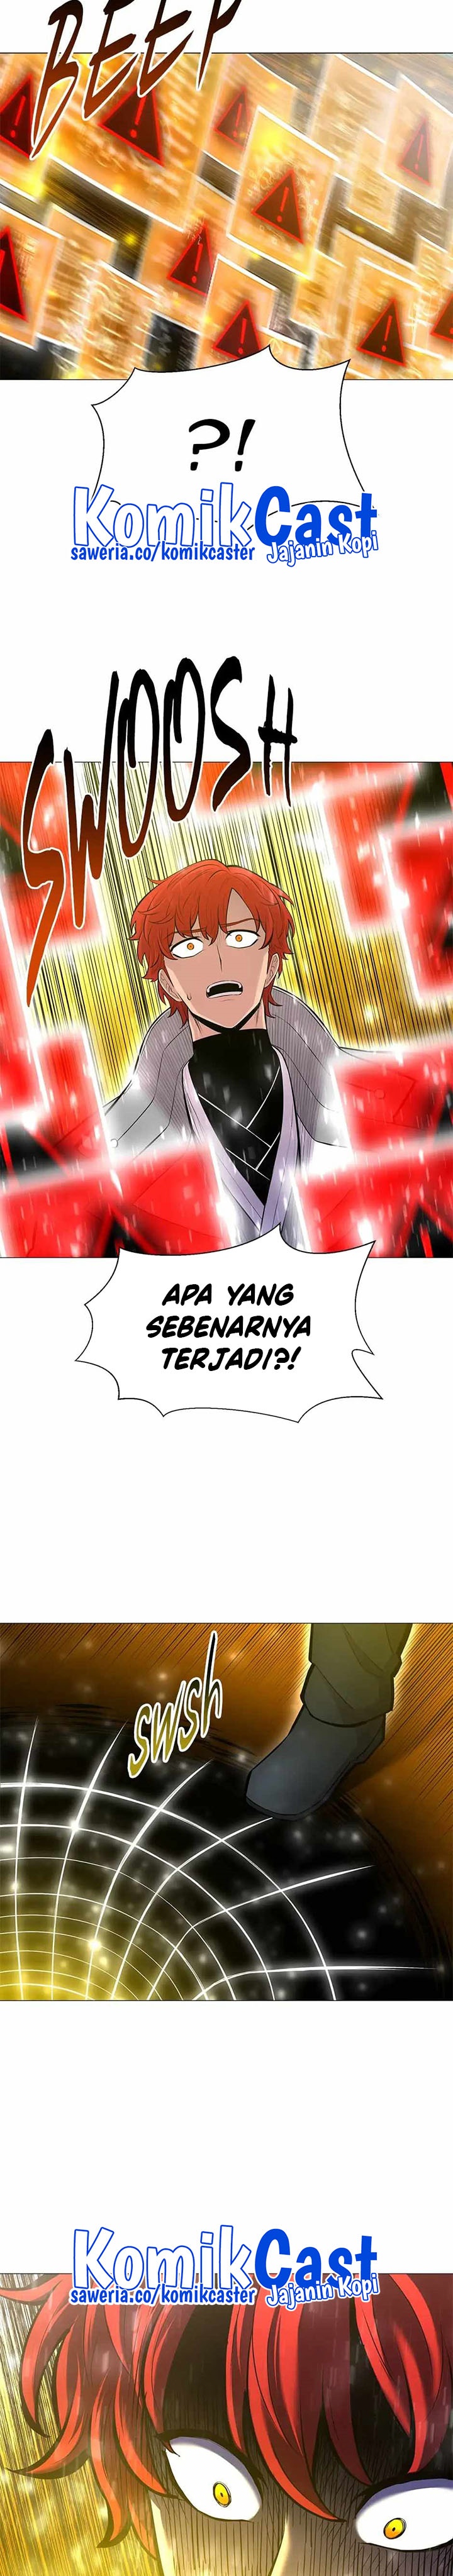 Updater Chapter 108